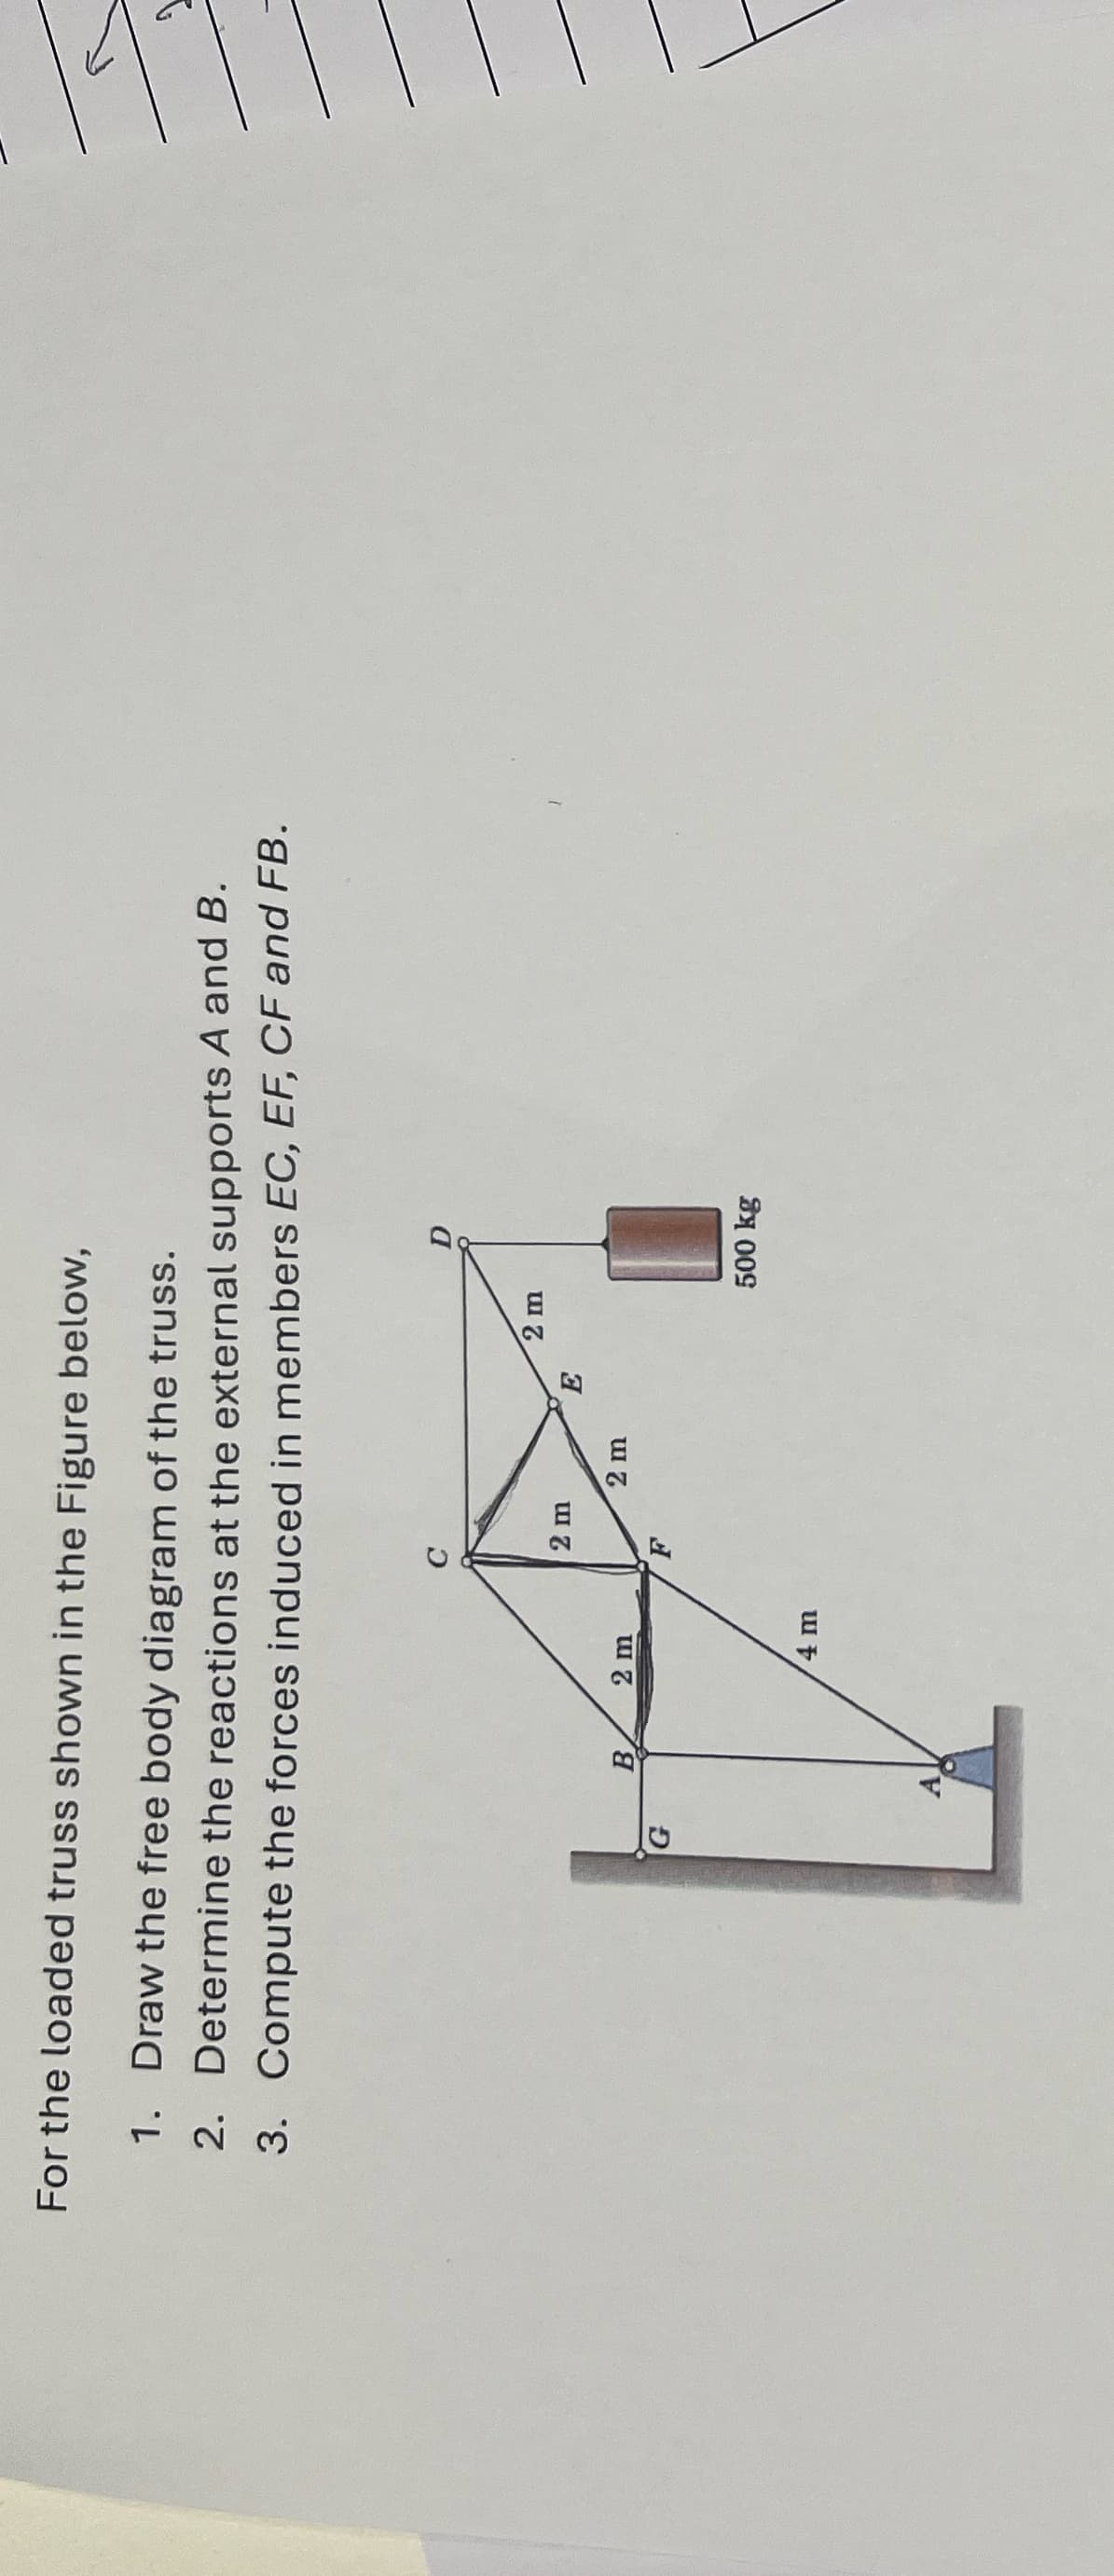 For the loaded truss shown in the Figure below,
1. Draw the free body diagram of the truss.
2. Determine the reactions at the external supports A and B.
3. Compute the forces induced in members EC, EF, CF and FB.
C
2 m
E
2 m
B
2 m
4 m
2 m
500 kg